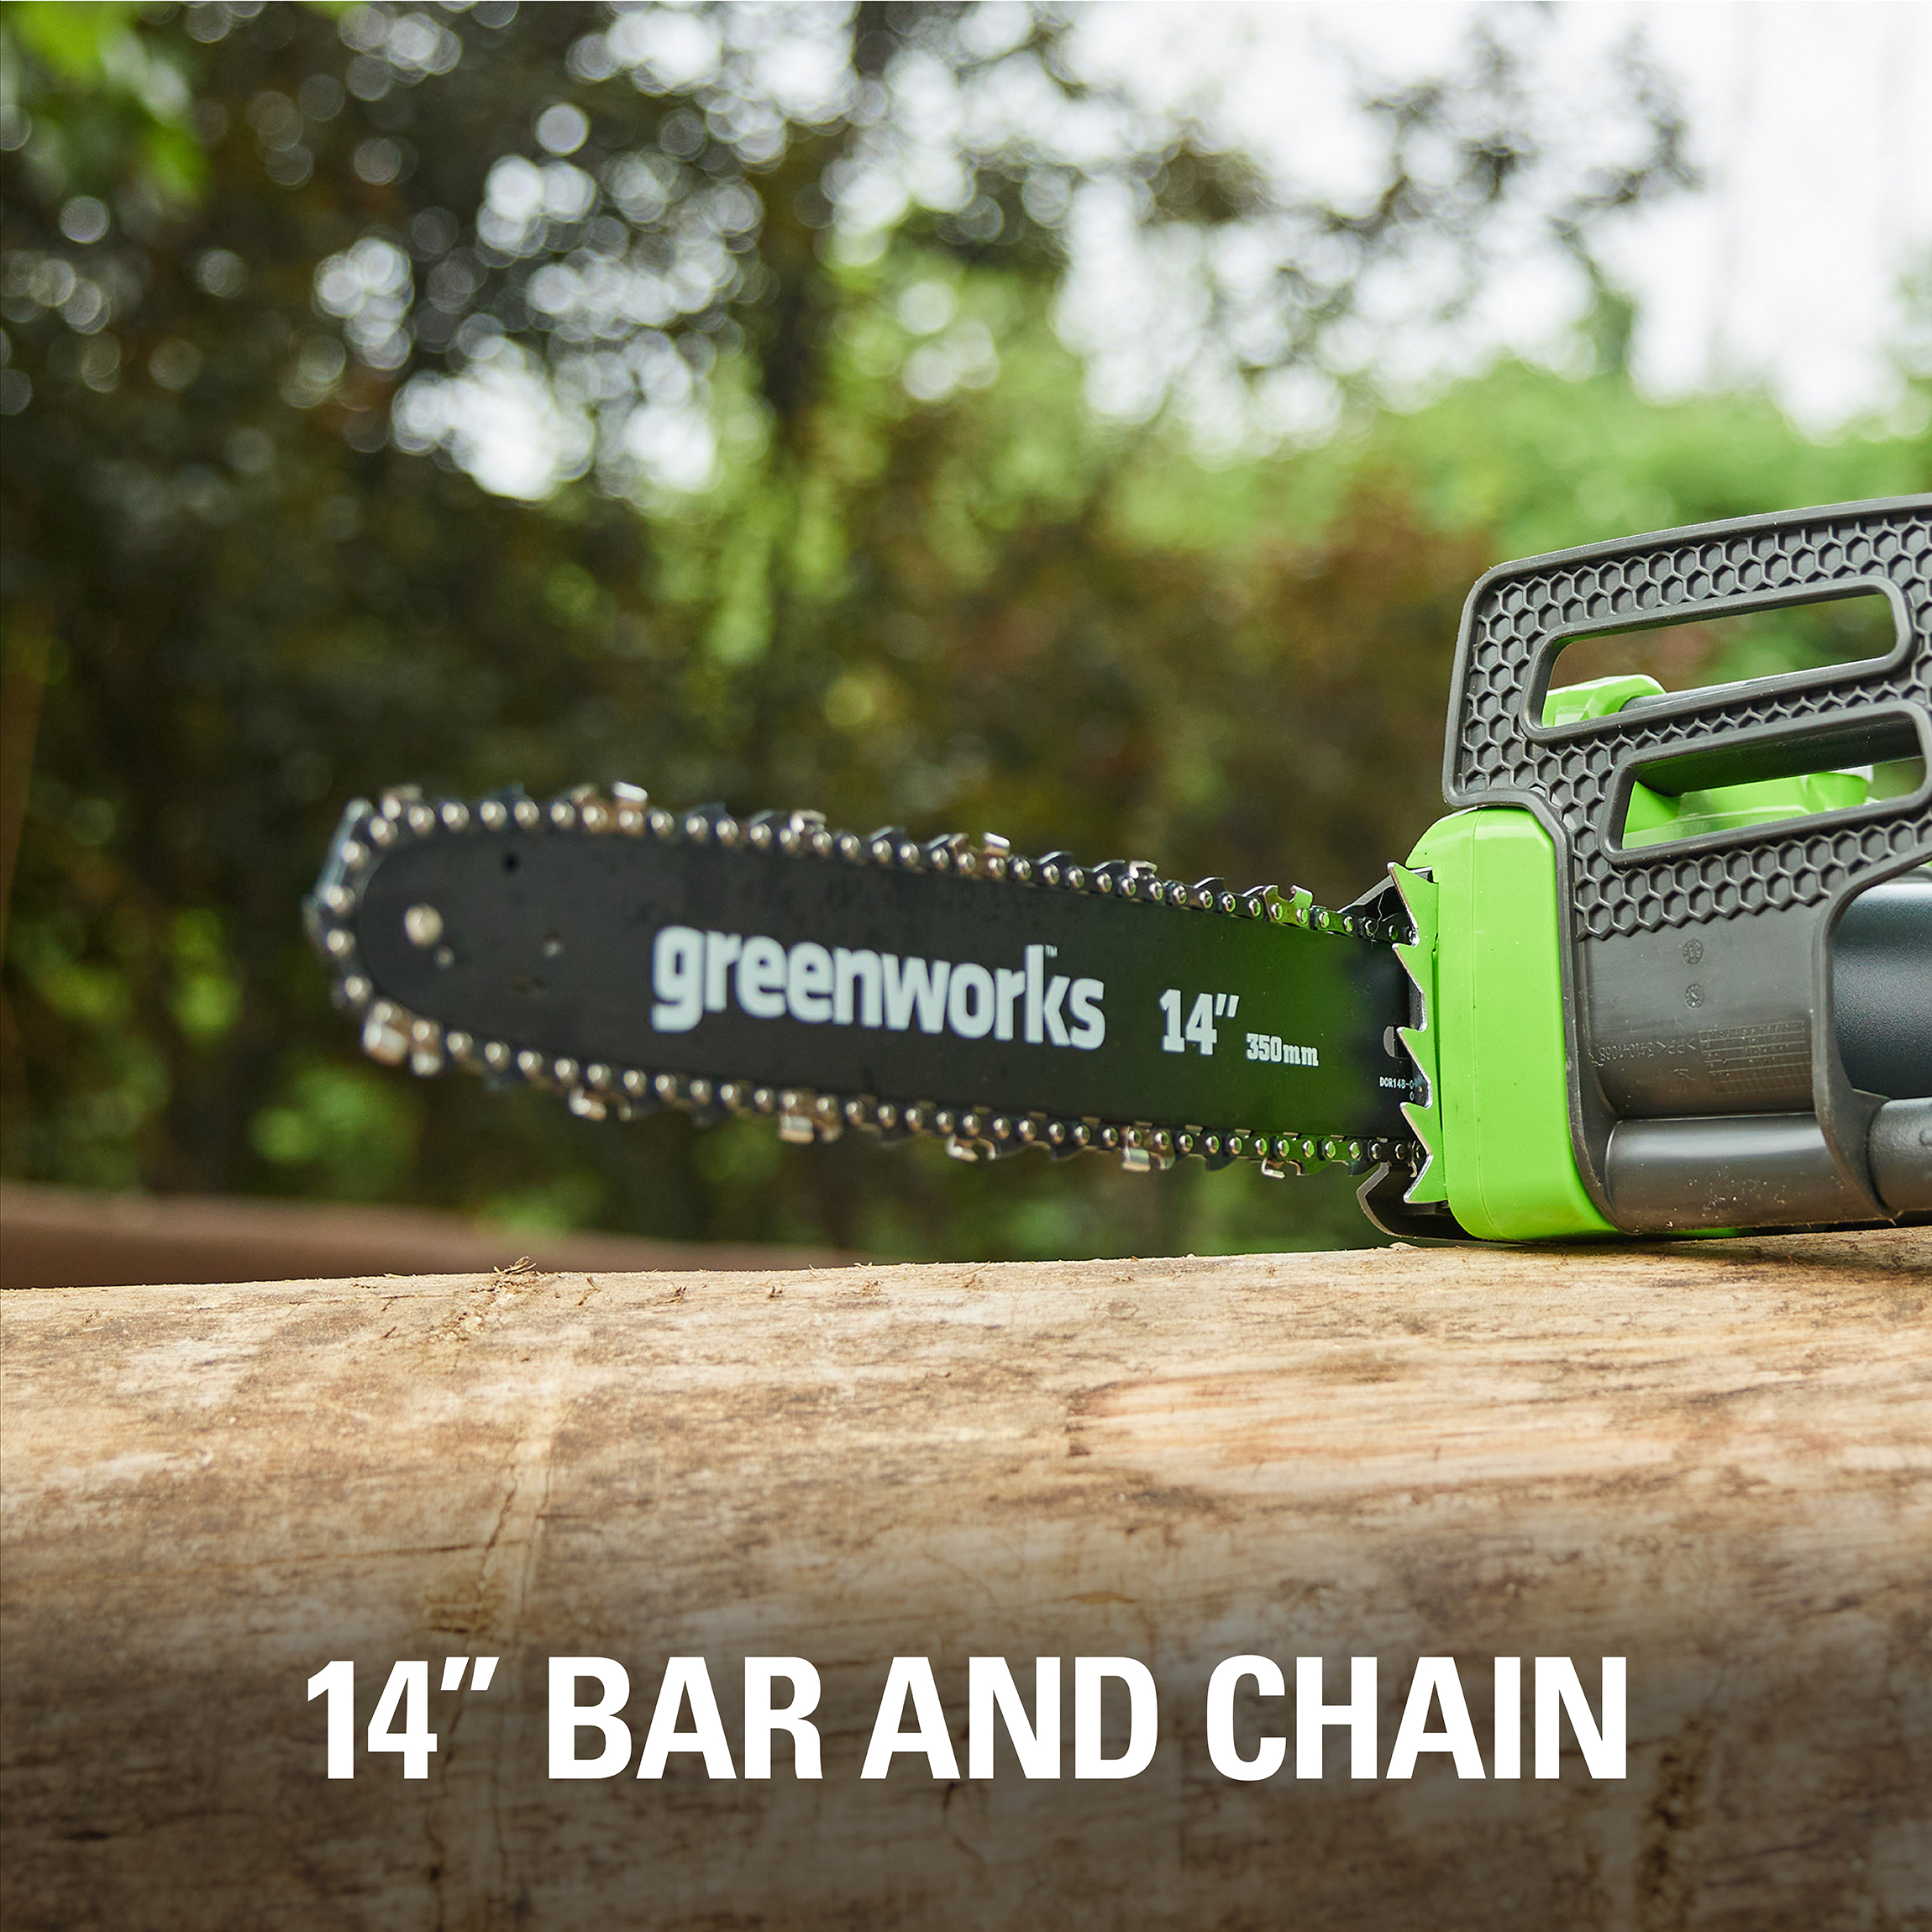 Greenworks 105 Amp 14-inch Corded Electric Chainsaw， 20222